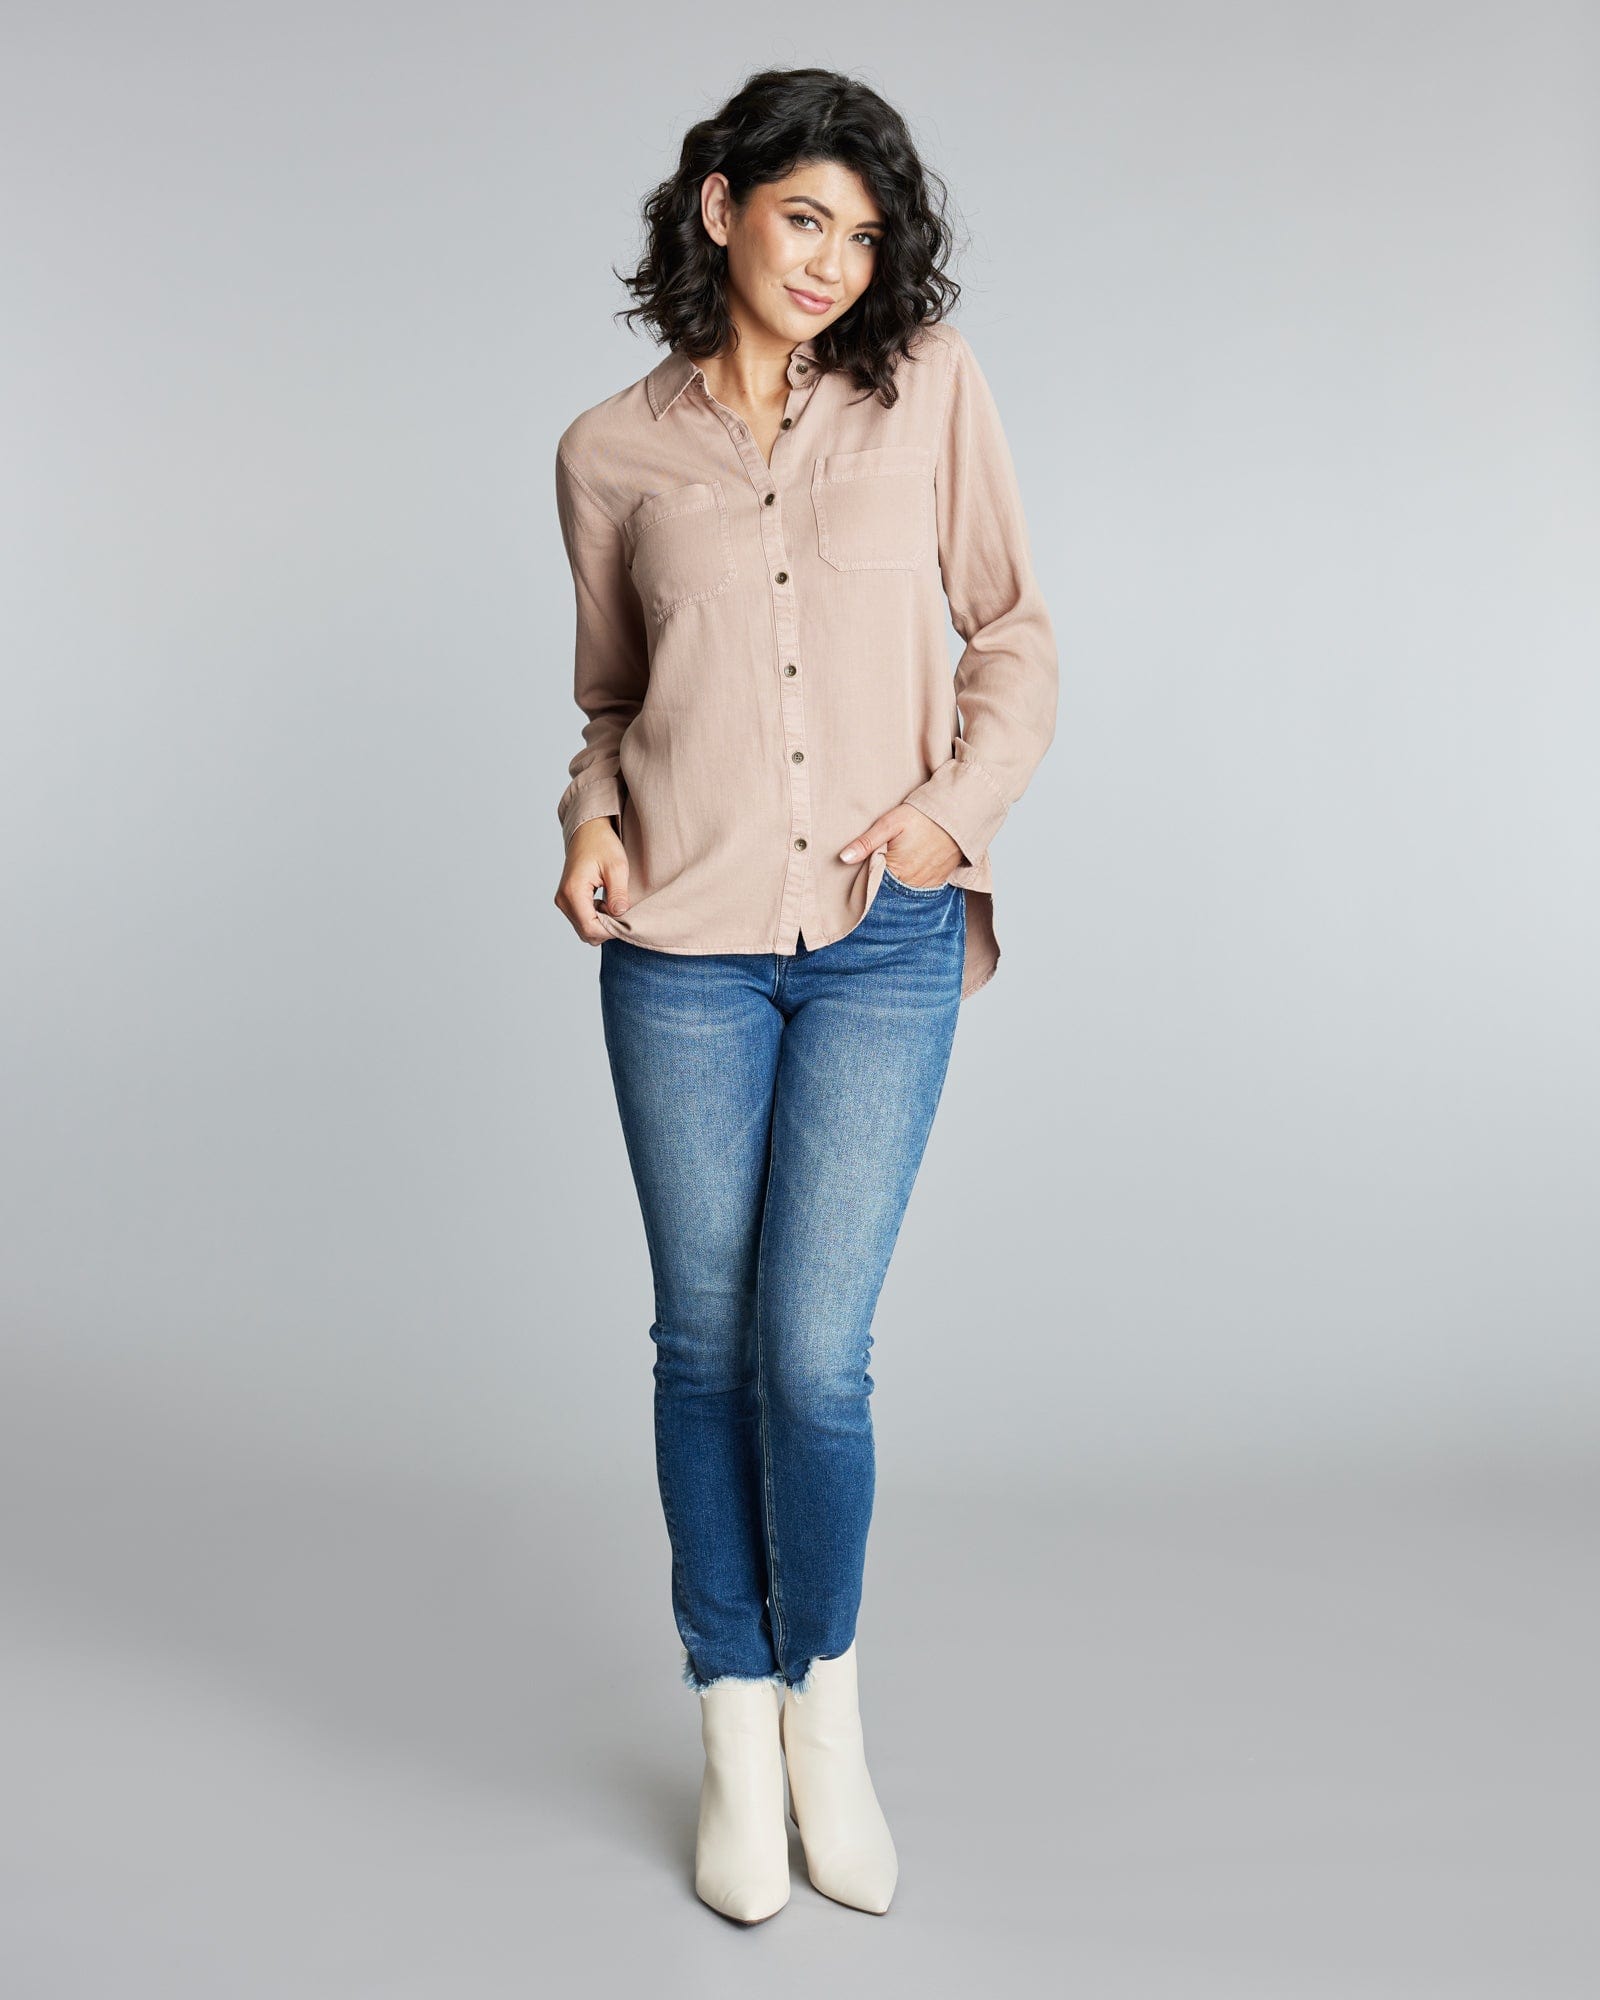 Woman in a long sleeve, pink button down blouse